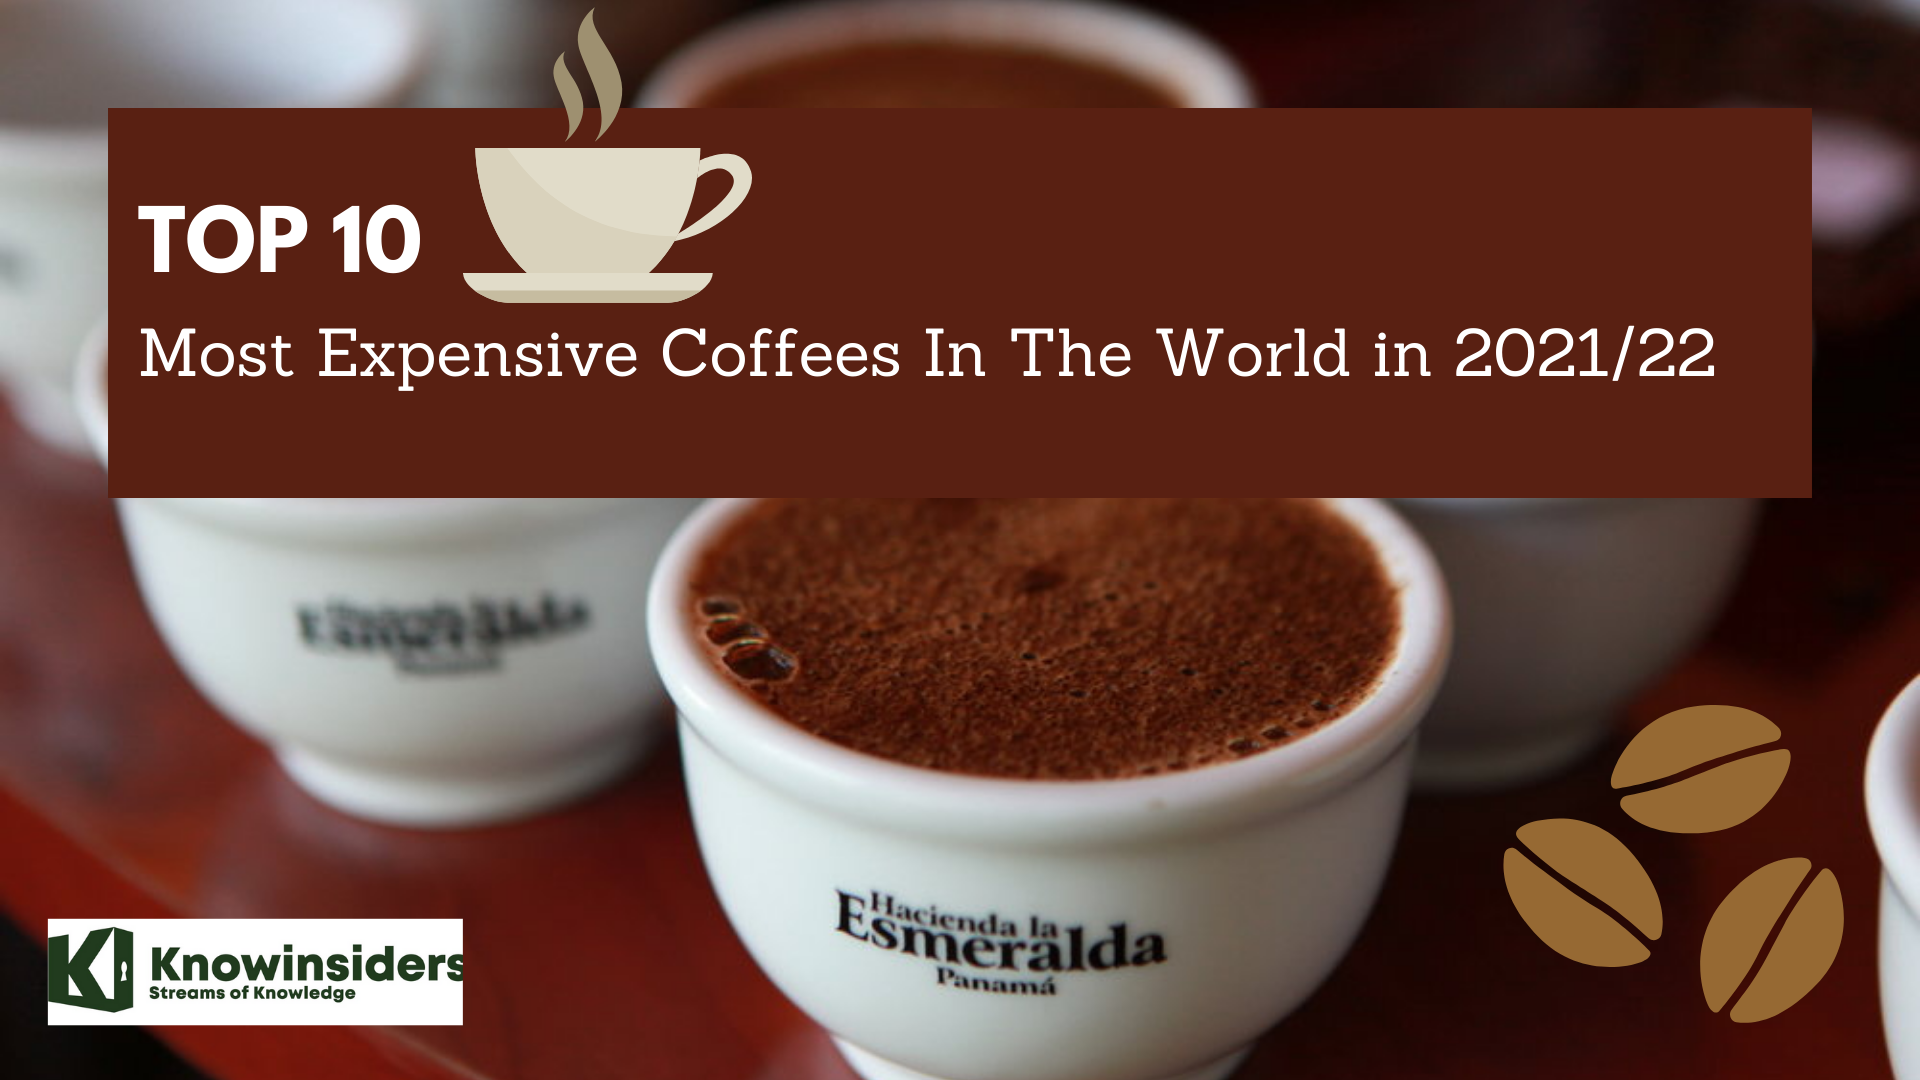 Top 10 most expensive coffee in the world in 2021/22